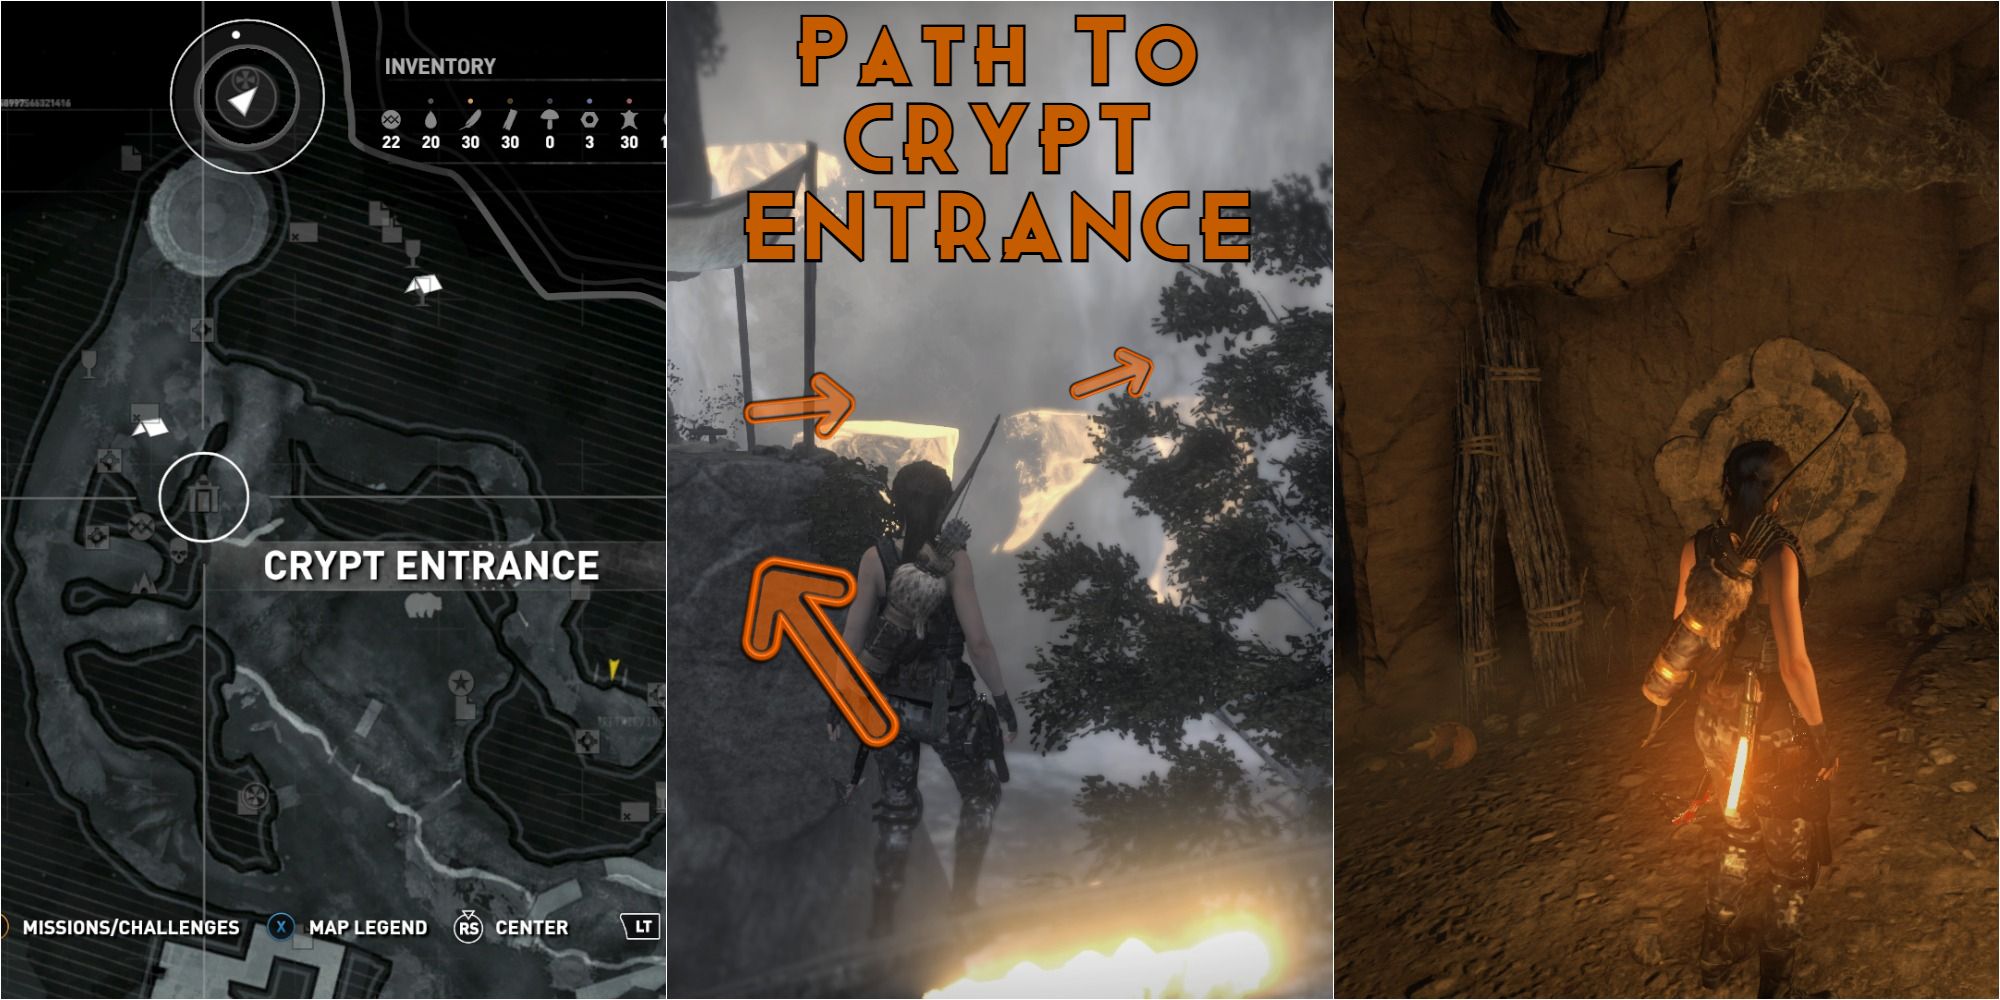 Rise Of The Tomb Raider Crypt Entrance And Mural Split Image With Arrows